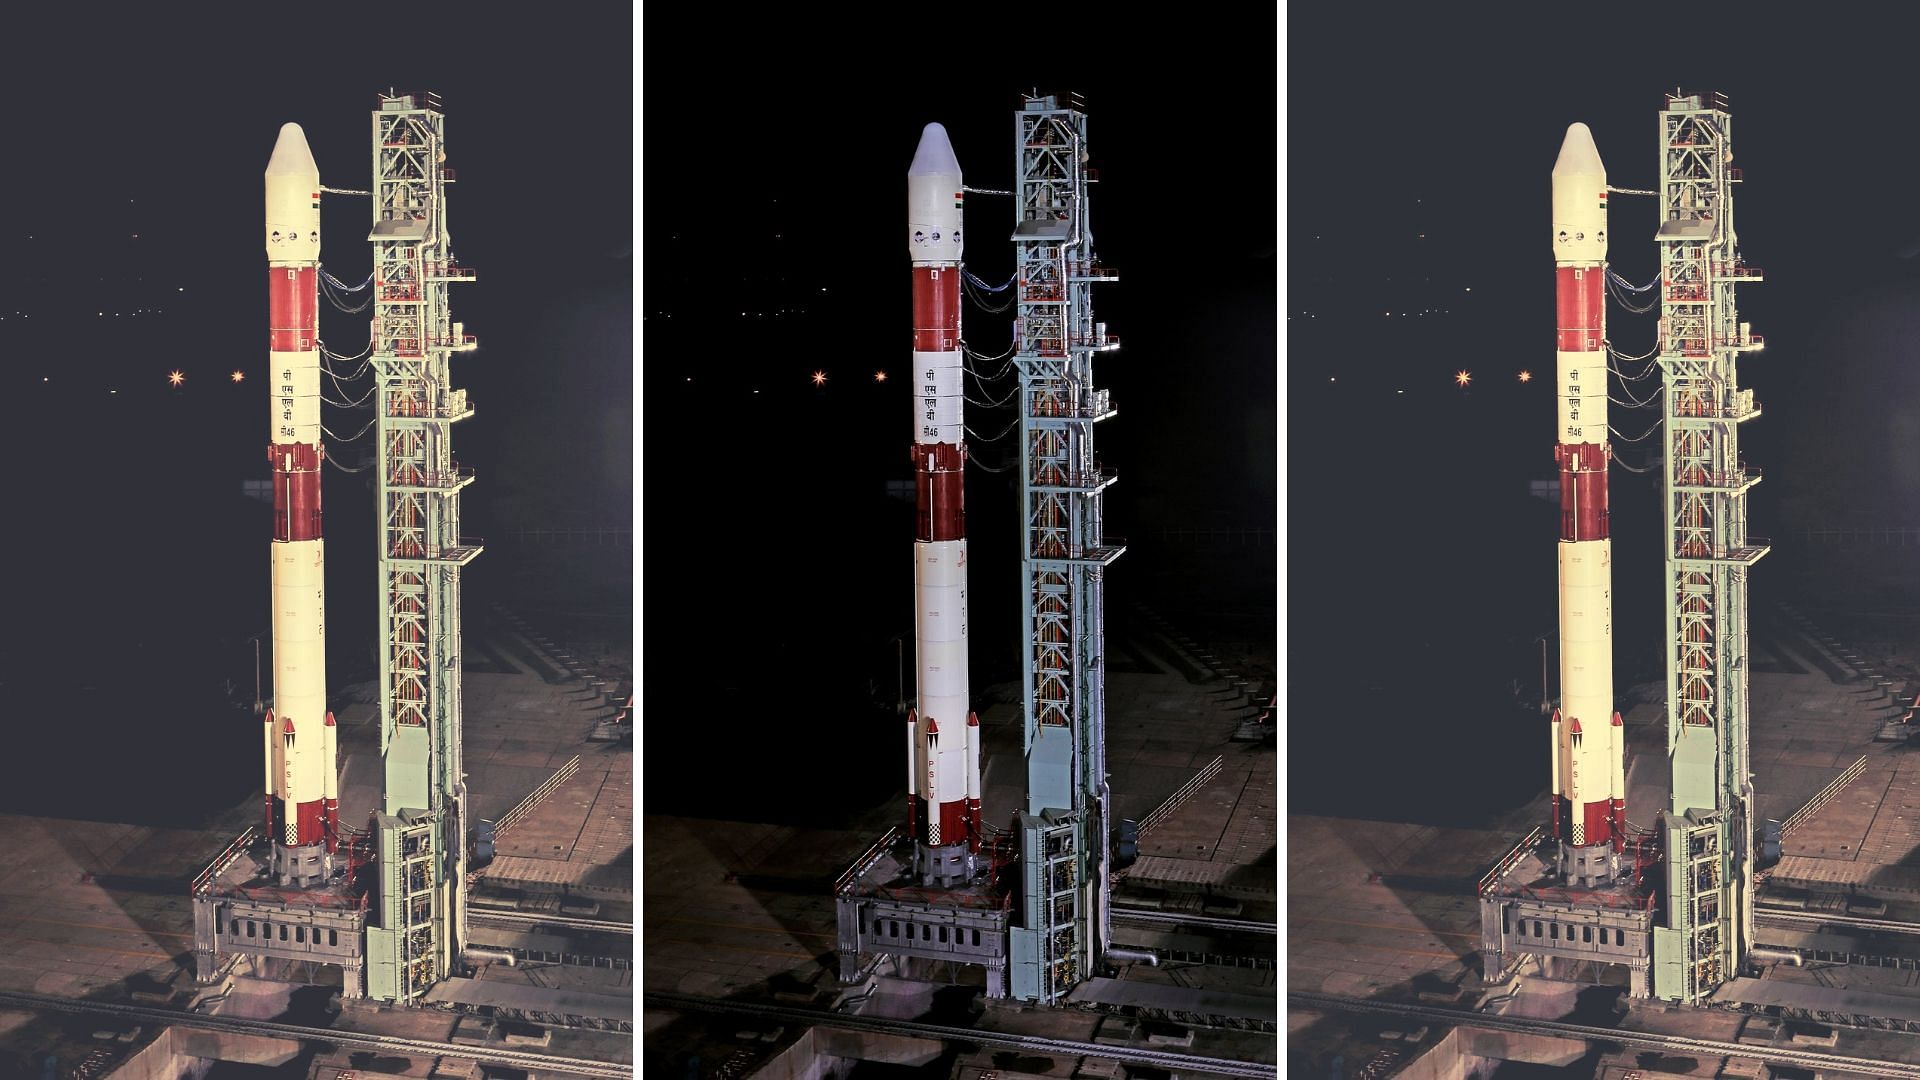 The PSLV C46 rocket ready for launch at the Sriharikota Space Centre.